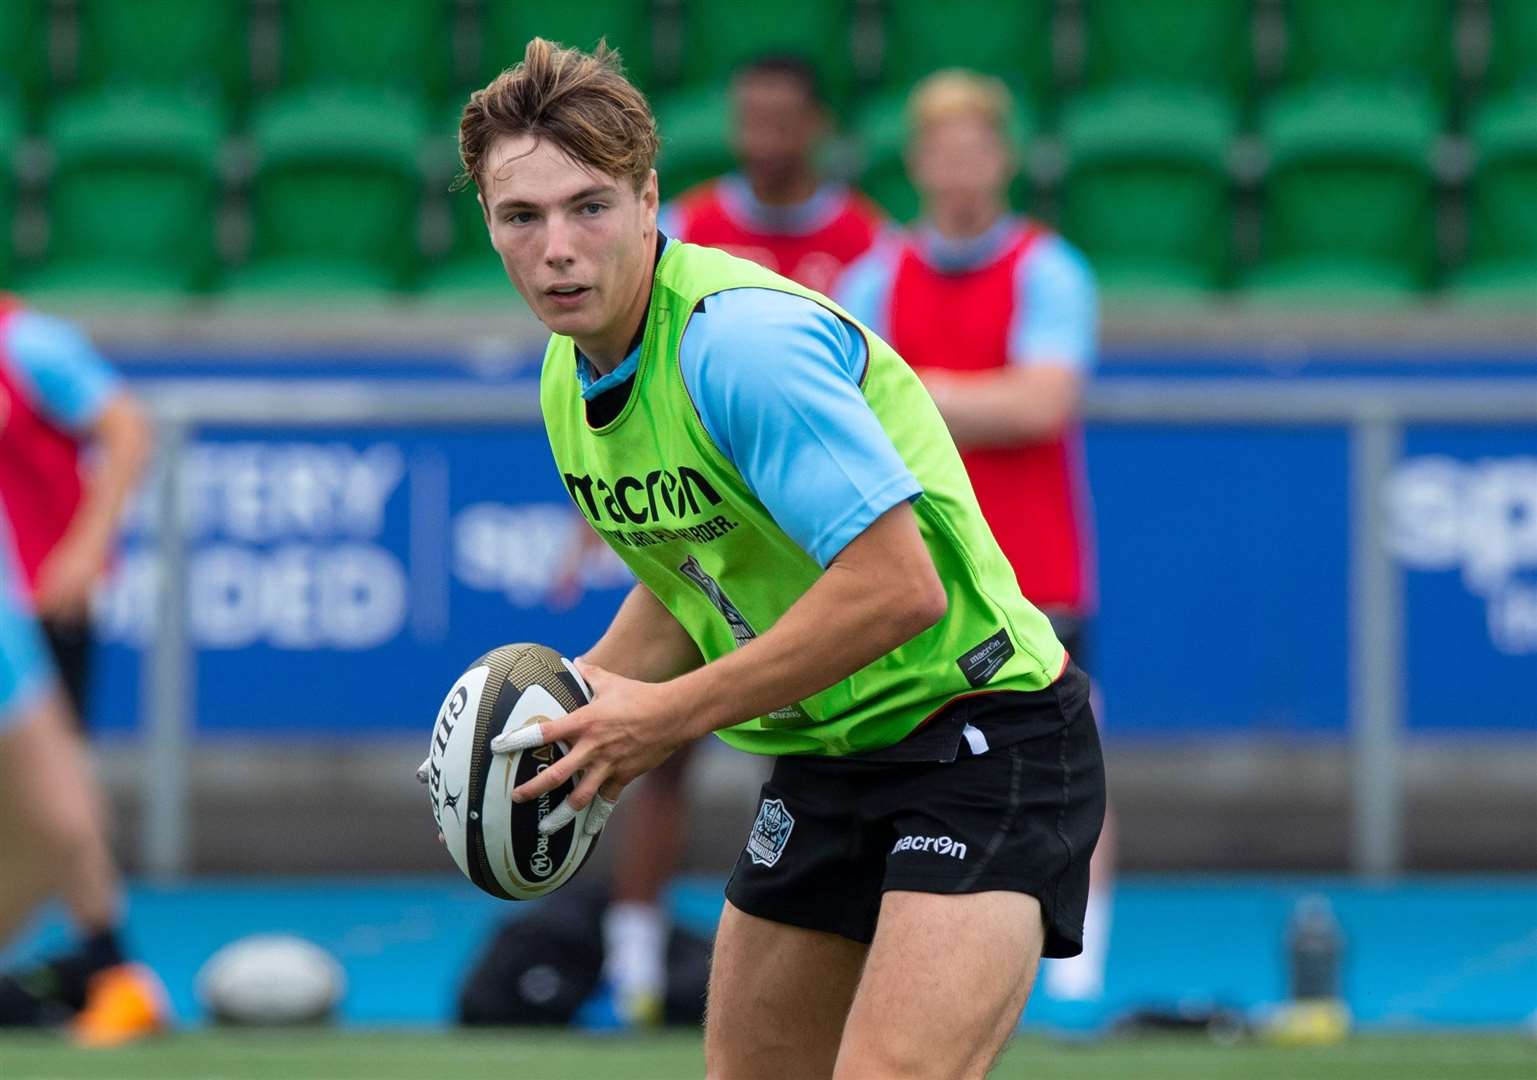 Jamie Dobie has been included in the Scotland 6 Nations squad as a training player, as the Highland teenager continues building experience at the highest level. SNS Group / SRU - Alan Harvey